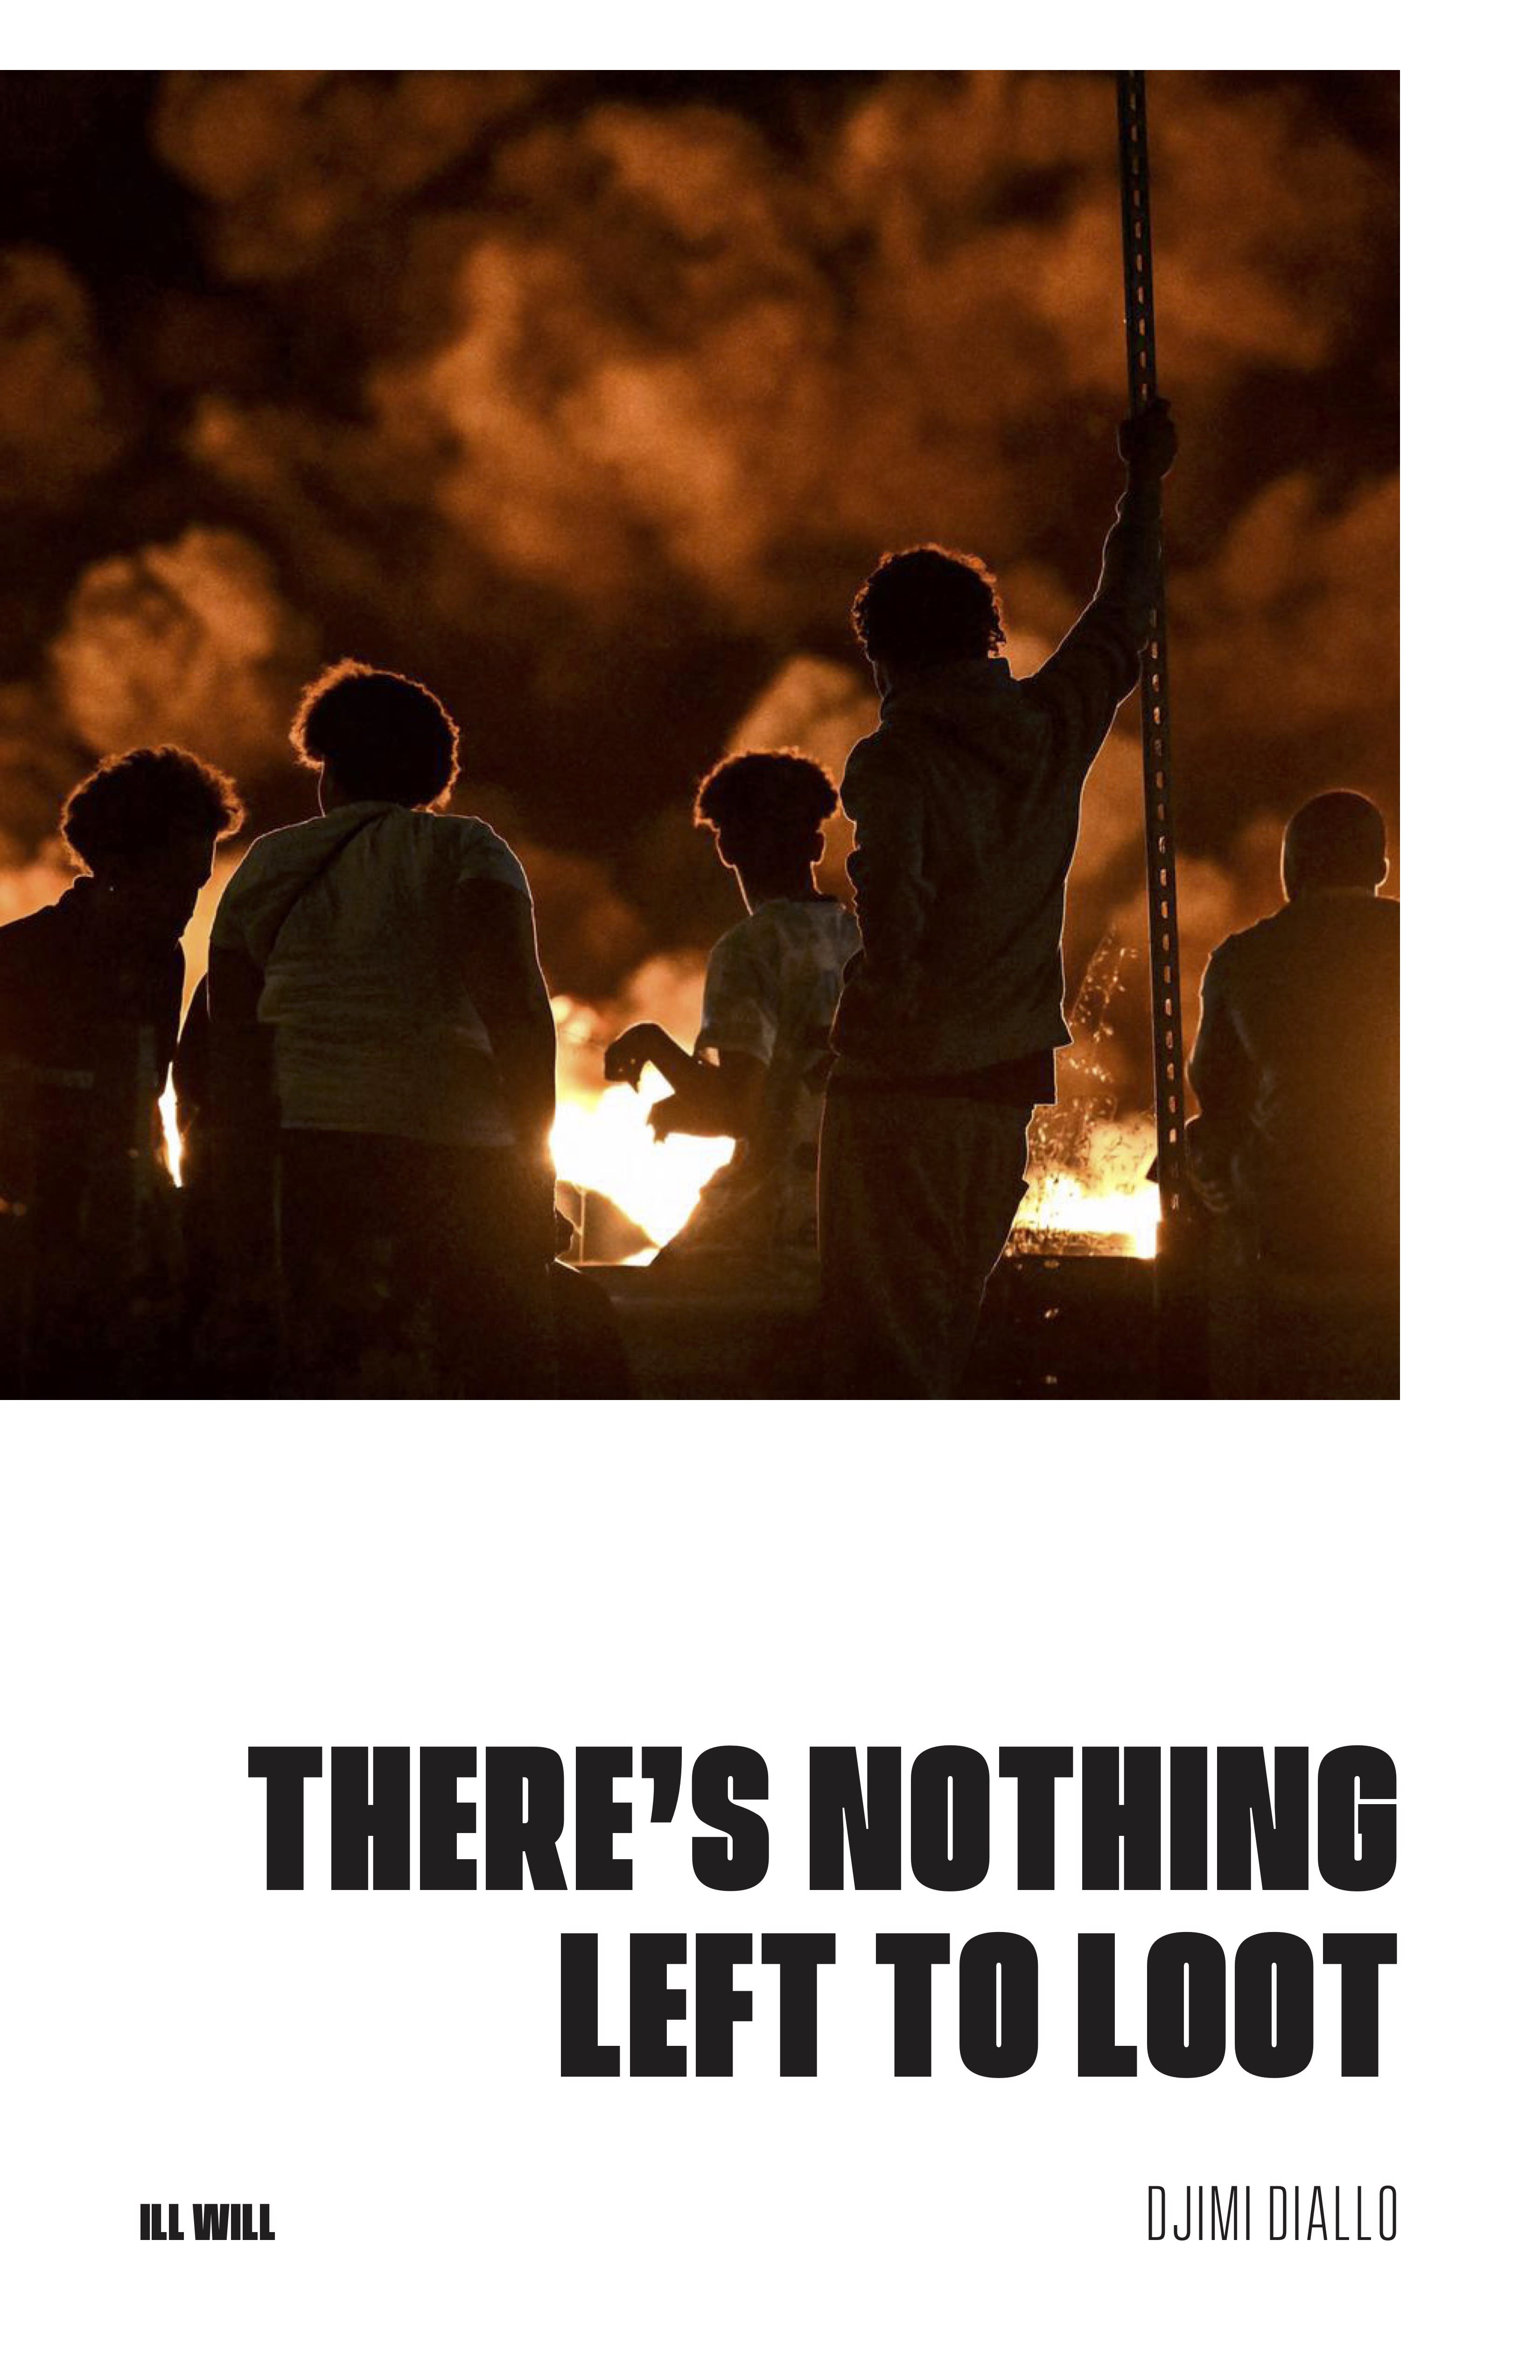 Cover Image for "There's Nothing Left to Loot"